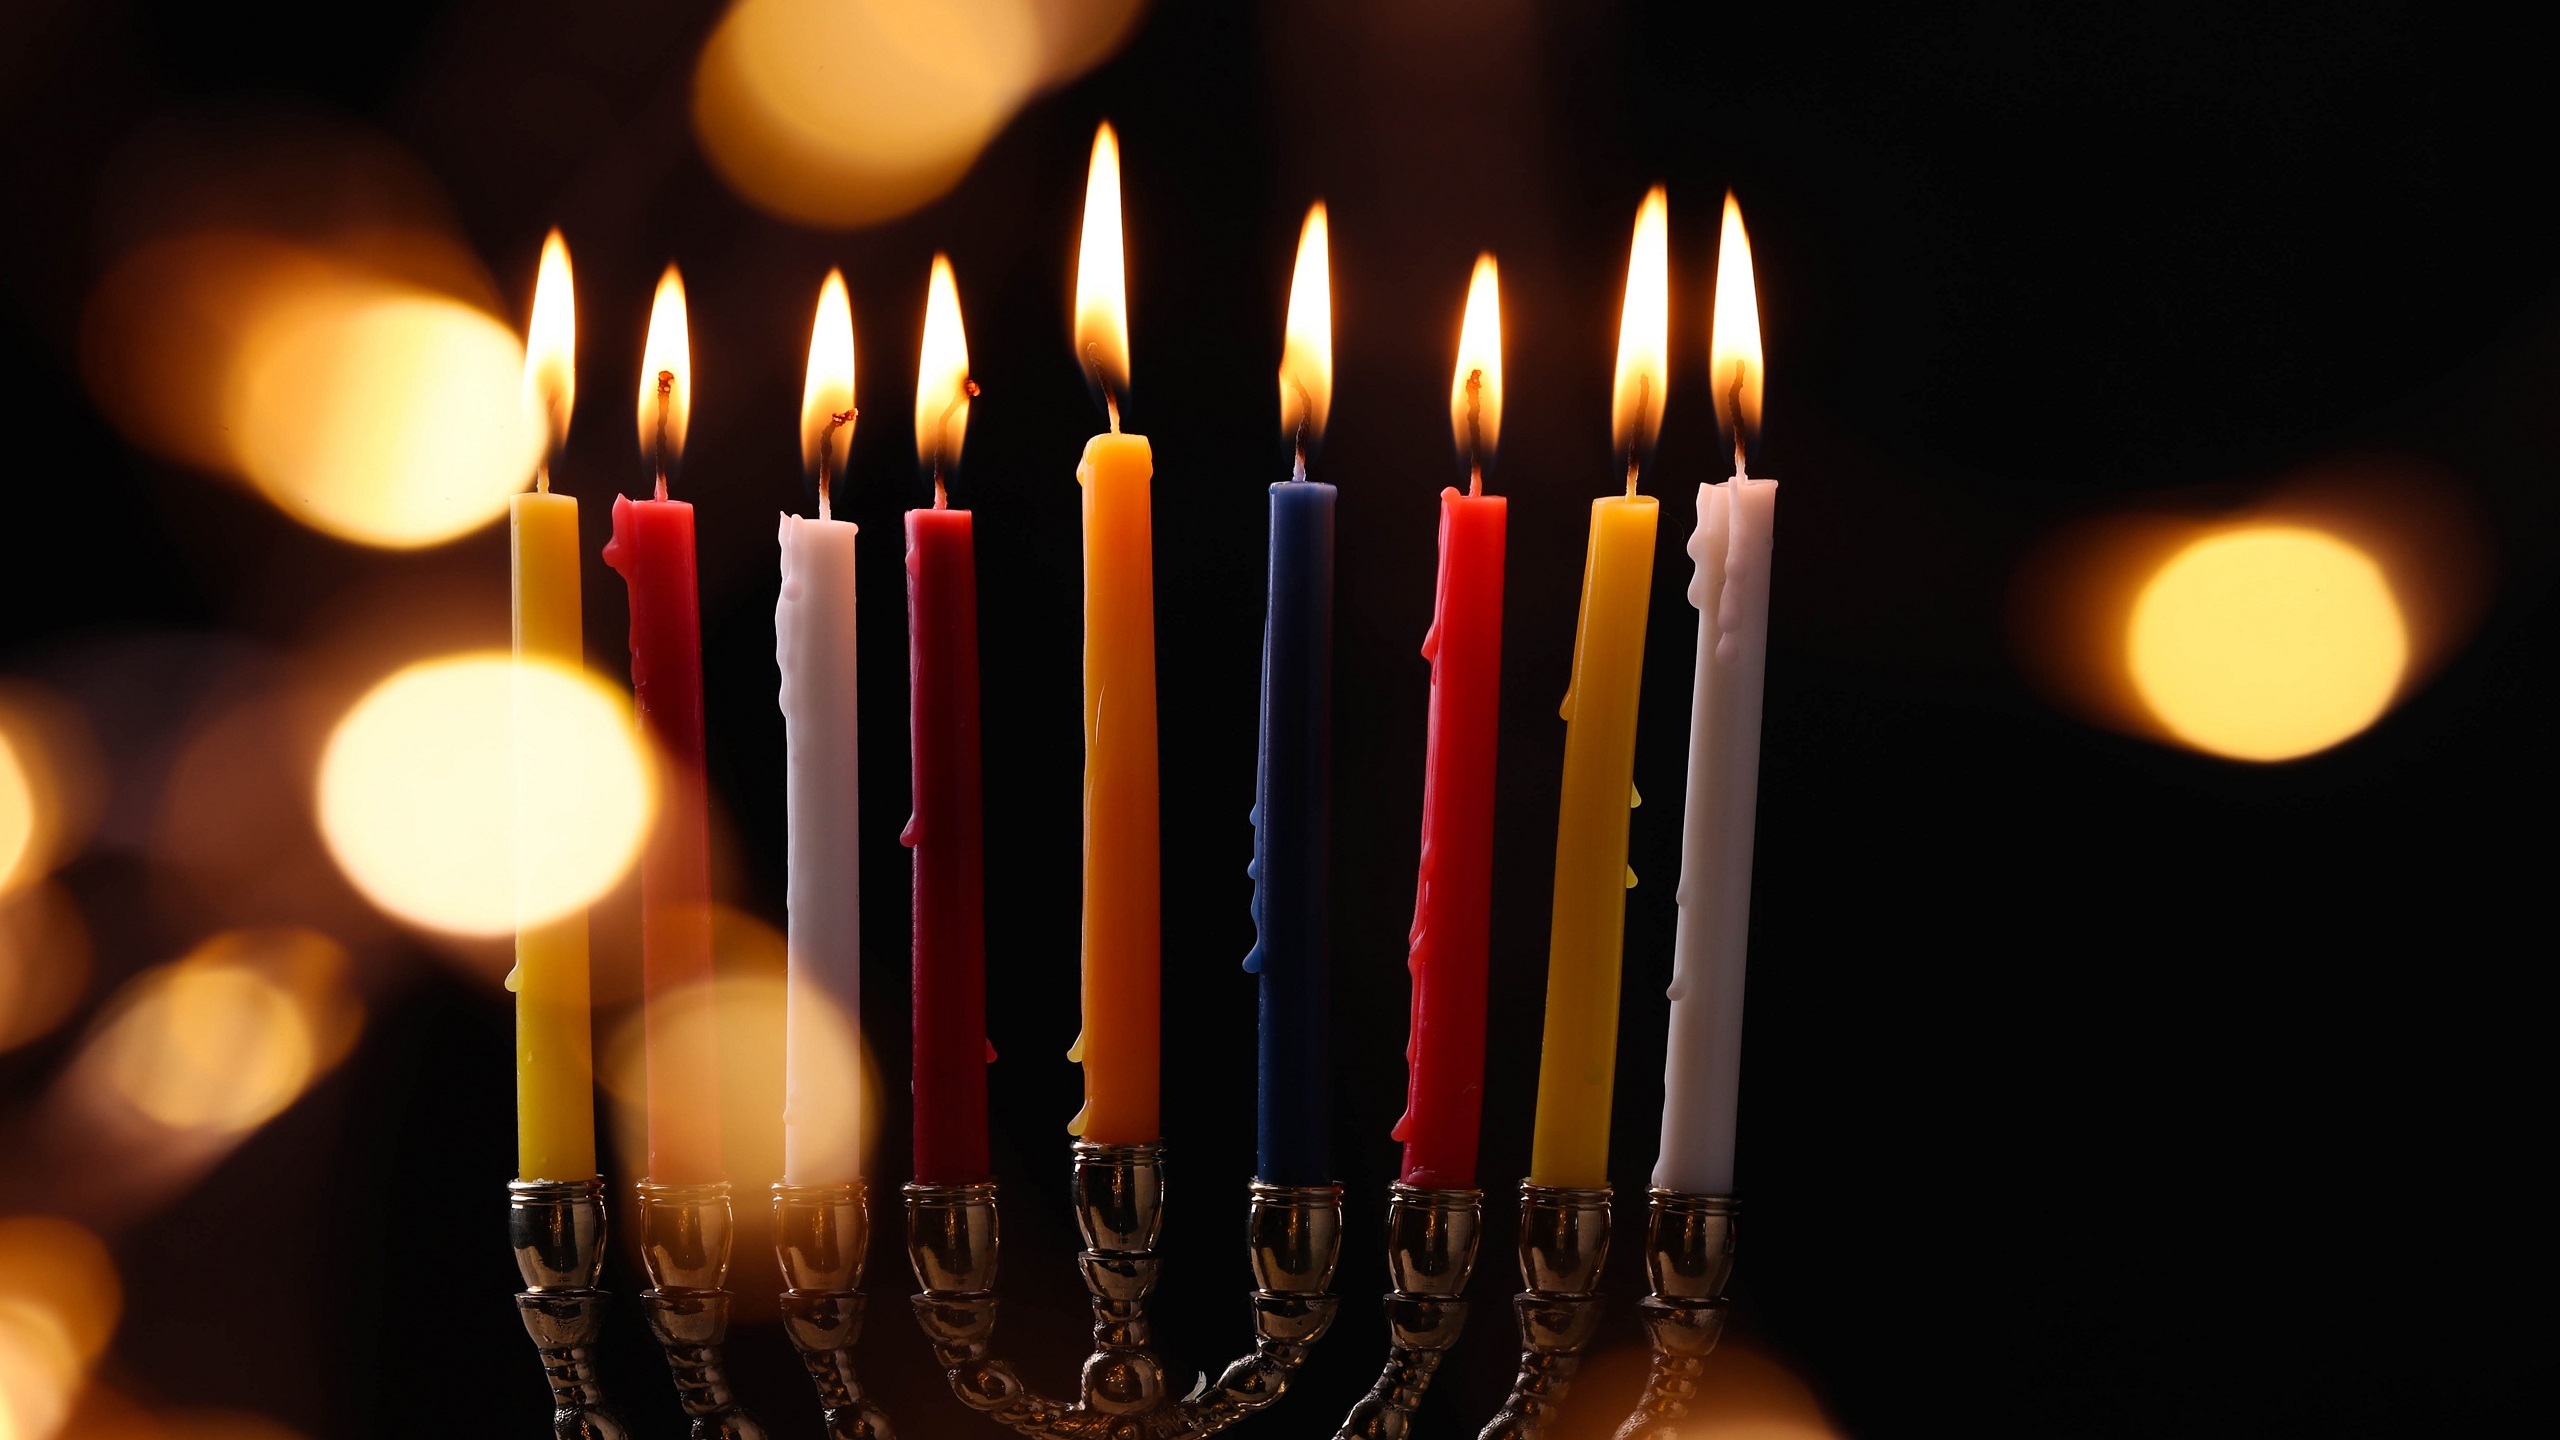 The Media Line Extends Warm Hanukkah Wishes, Celebrating Light and Truth